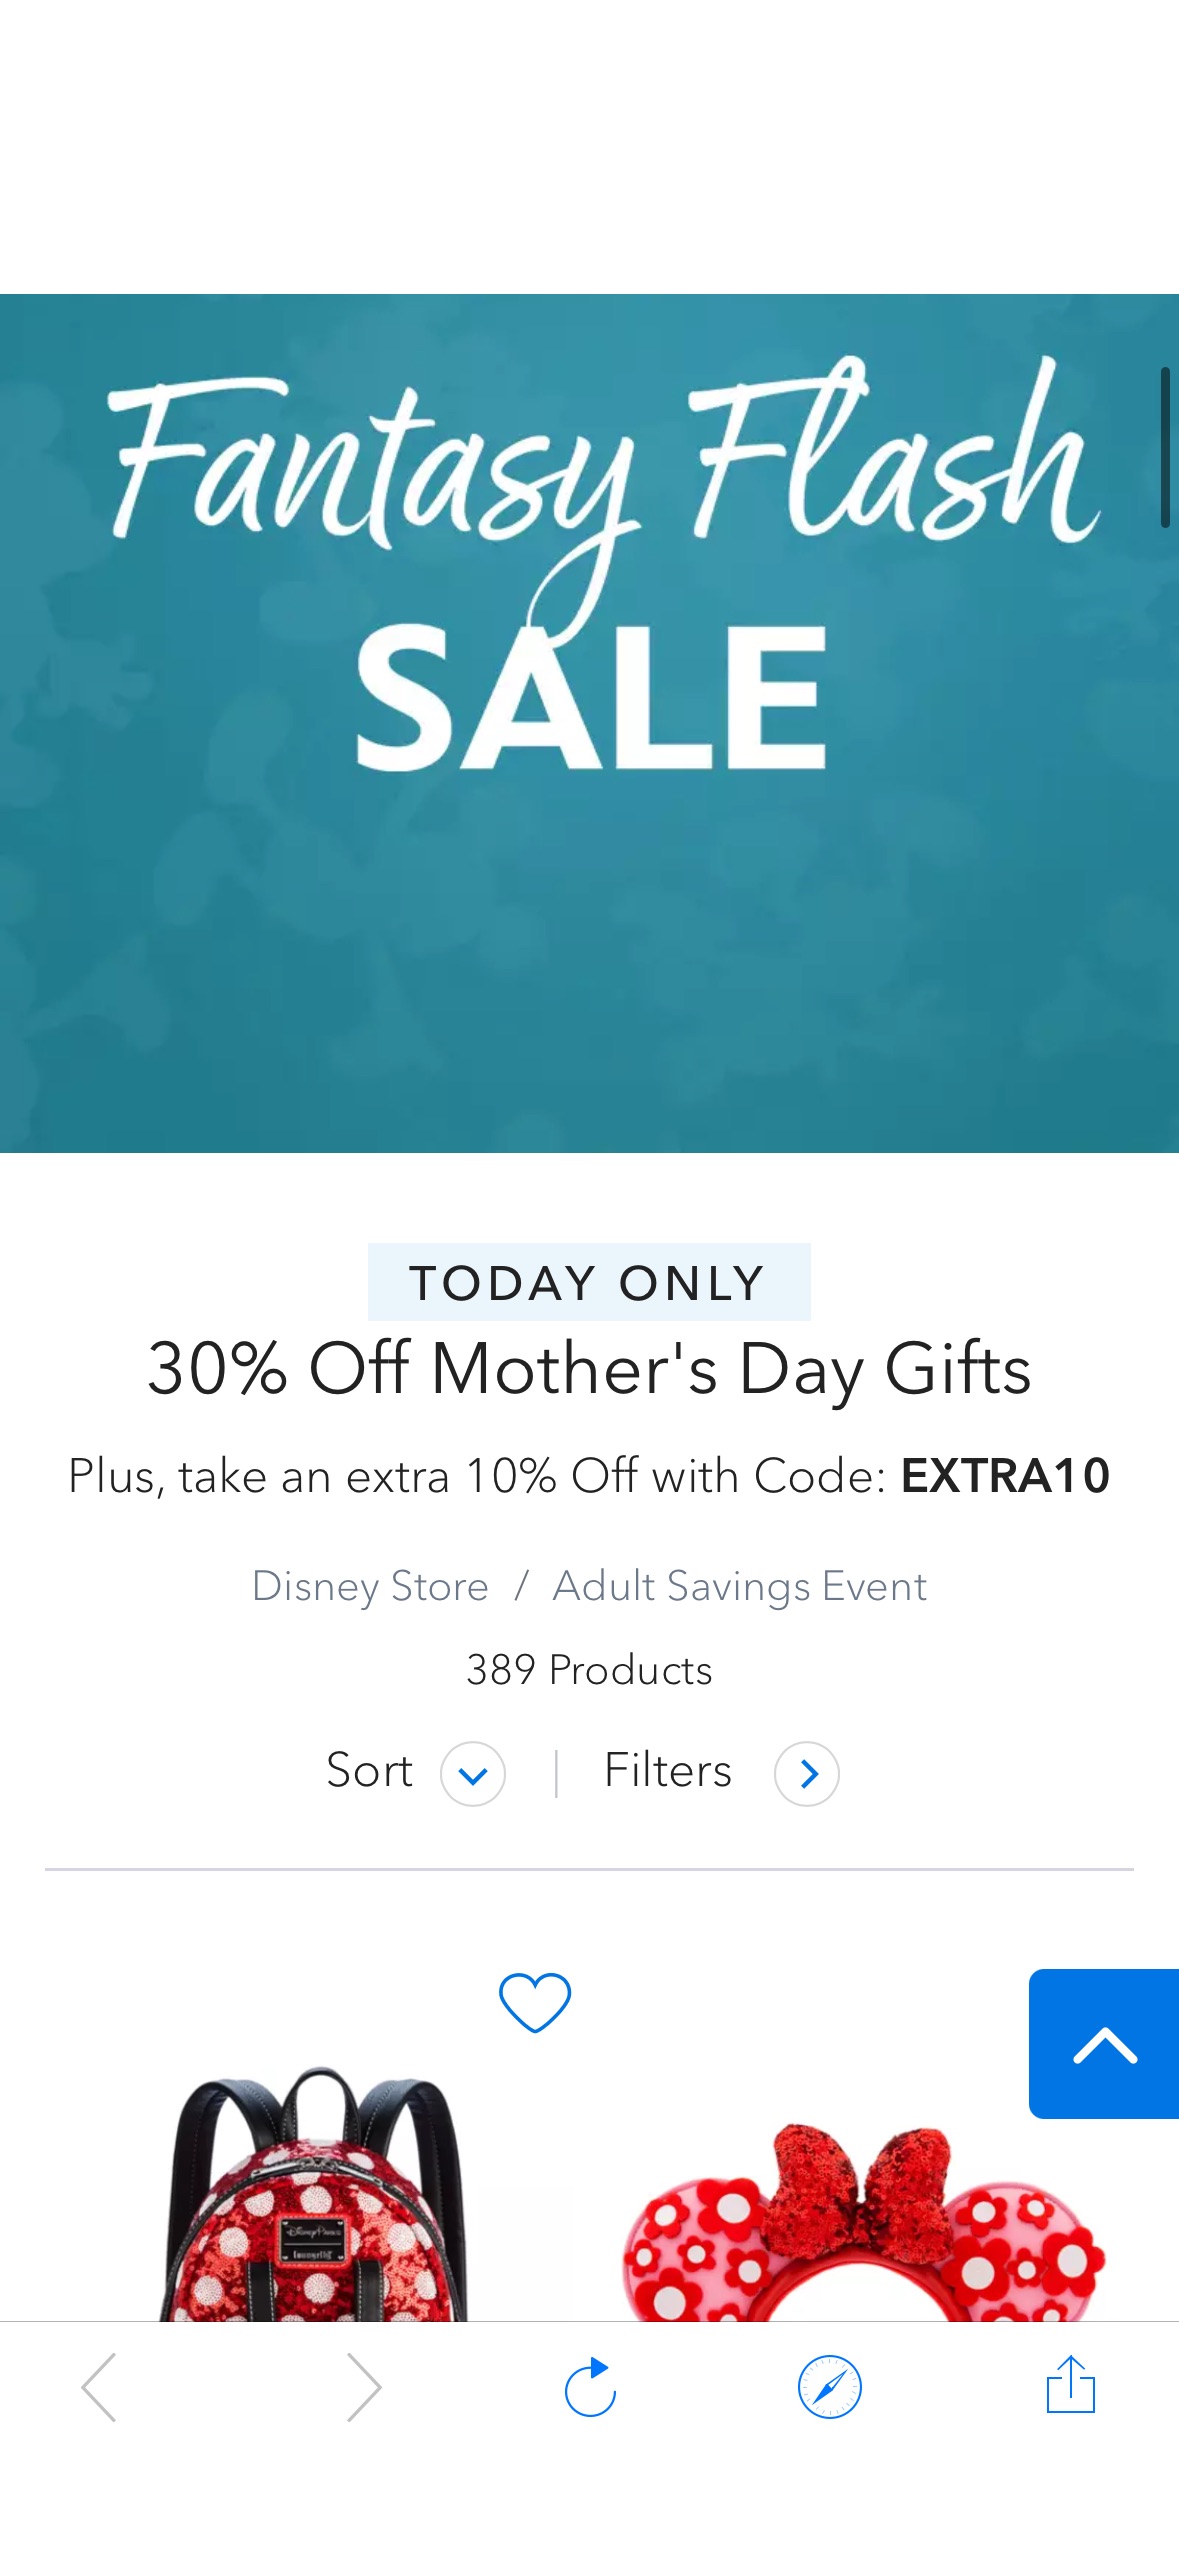 Today, April 24th only, save 30% off Mother’s Day gifts at ShopDisney! Plus, use code EXTRA10 to save an additional 10% at checkout!